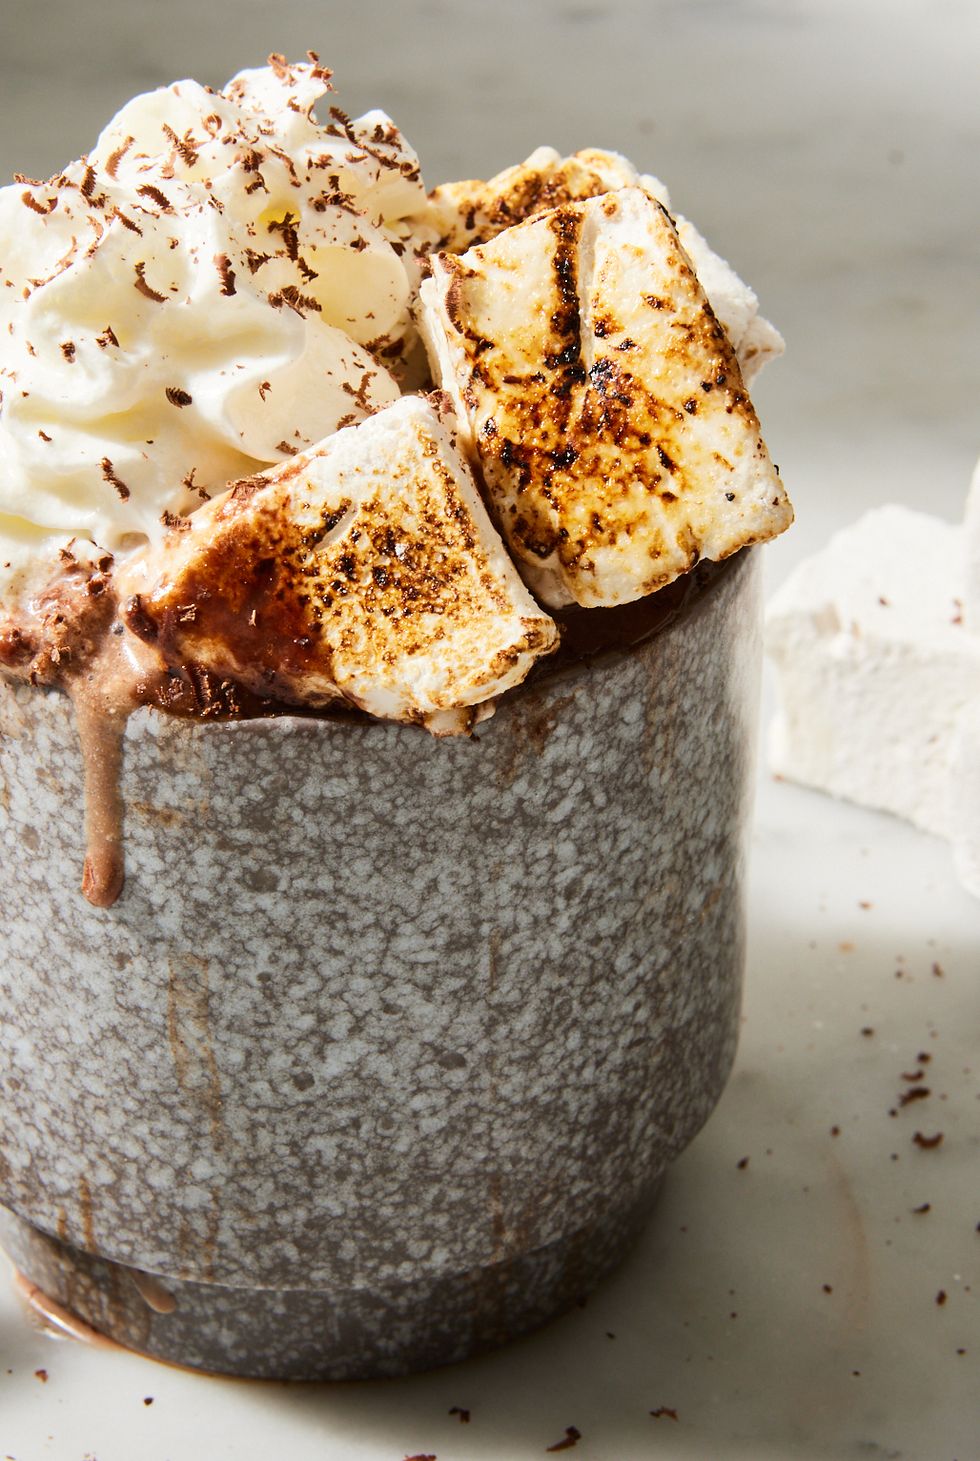 spiked hot chocolate with kahlua marshmallows and whipped cream